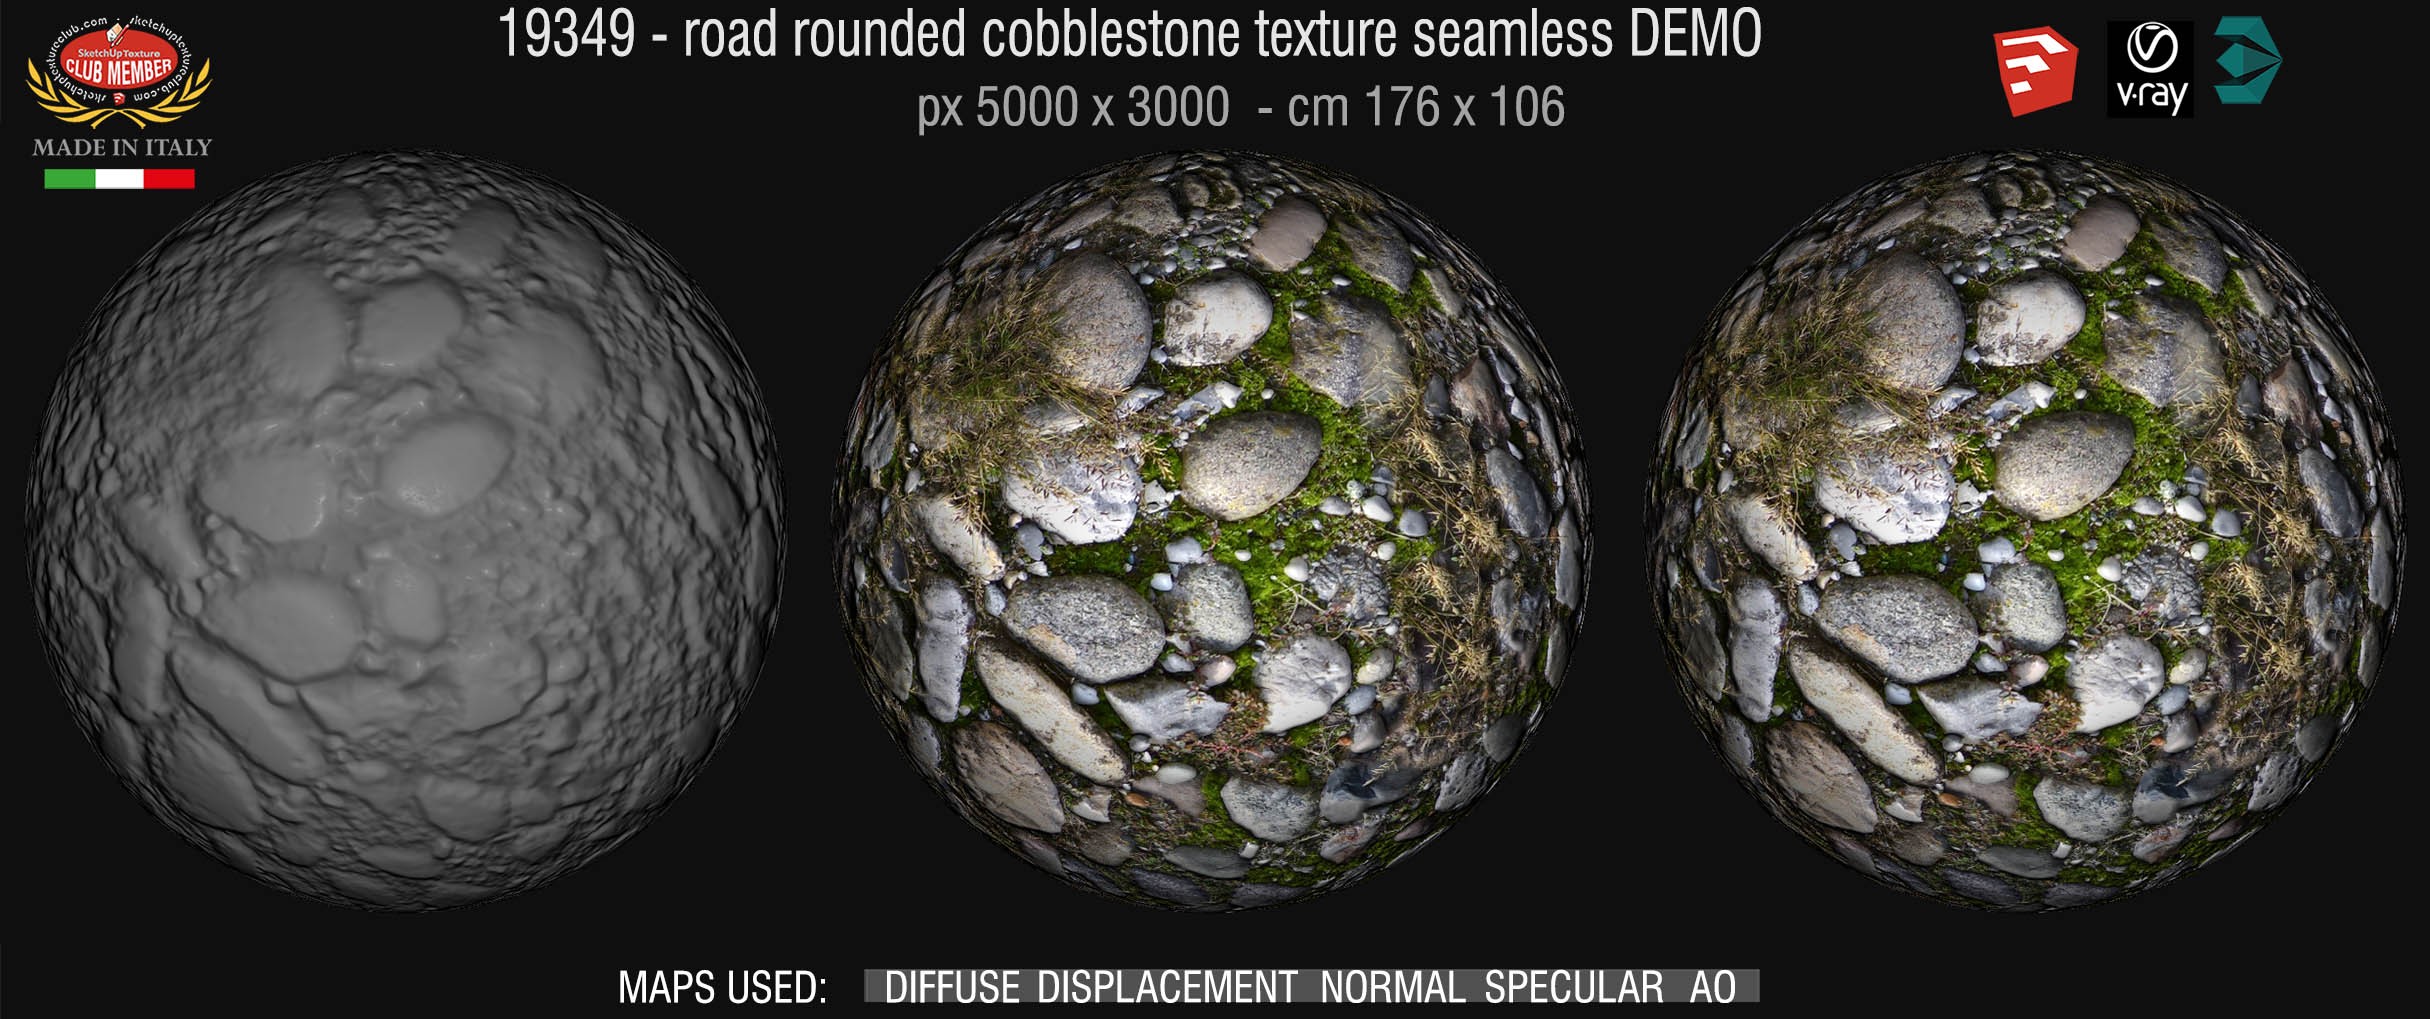 19349 Rounded cobblestone with dry grass texture seamless + maps DEMO